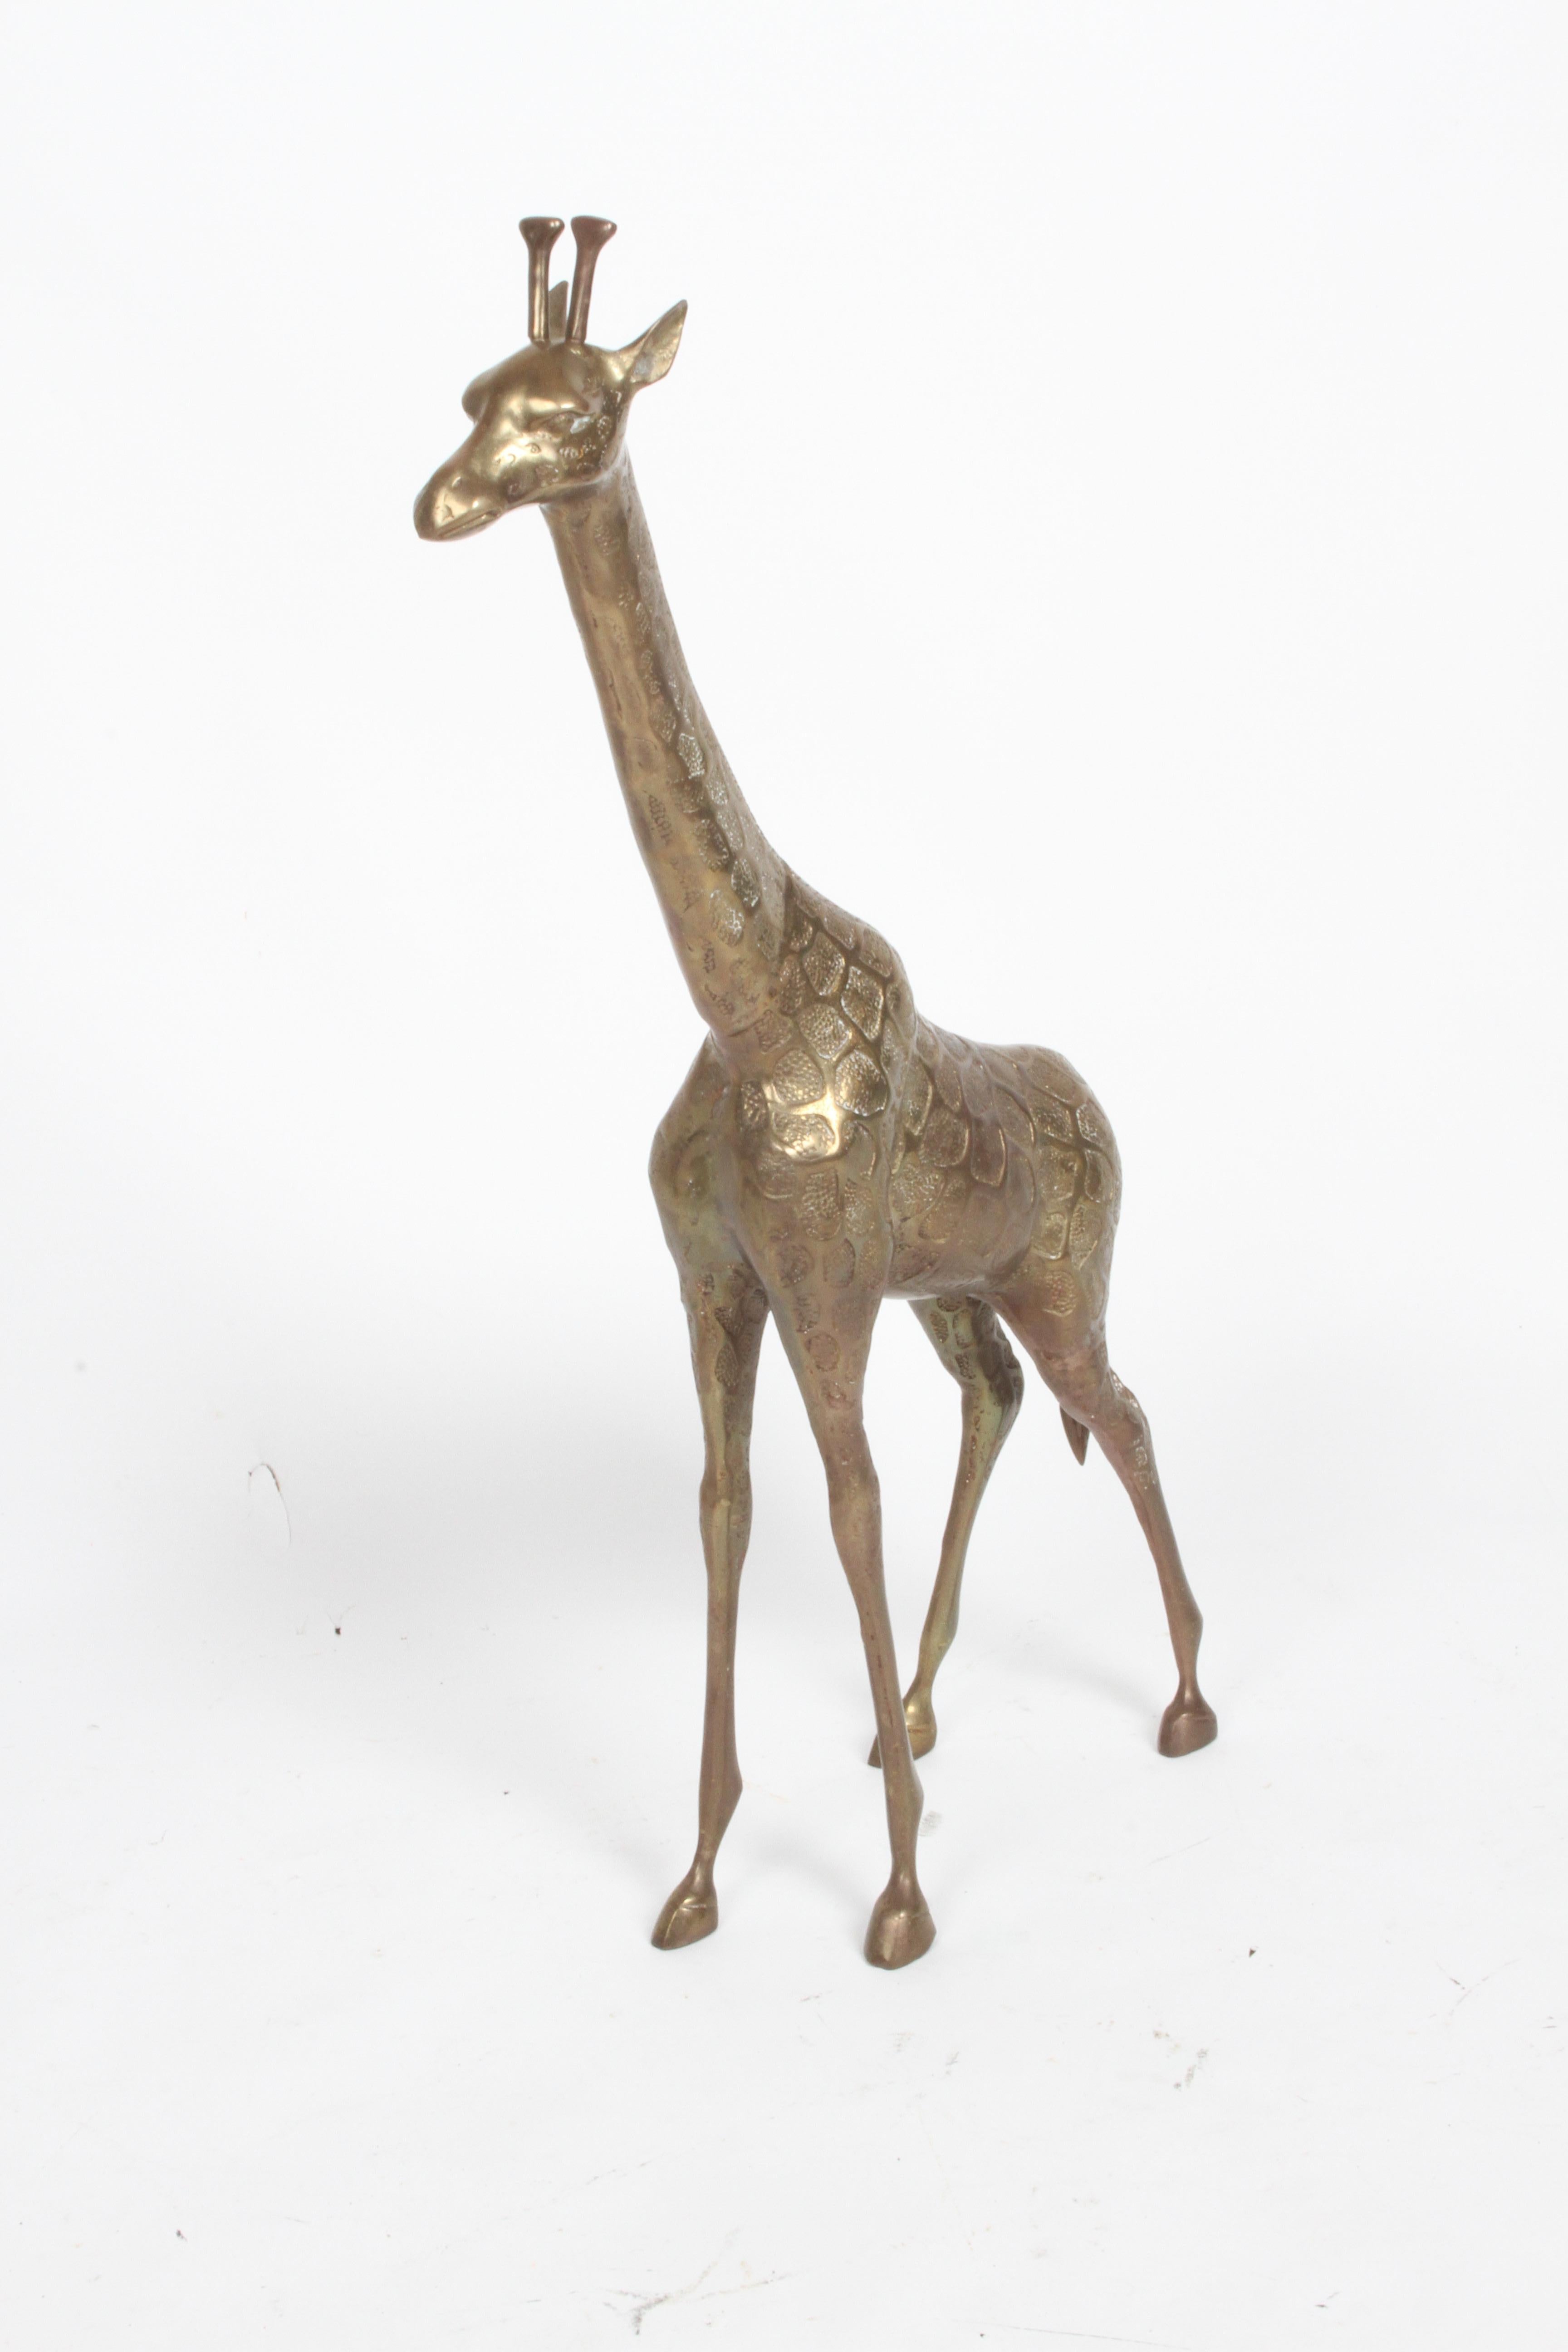 Vintage Hollywood Regency style standing brass Giraffe floor statue or sculpture circa 1970s. Original patina, unpolished. In fine condition, no damage noted.